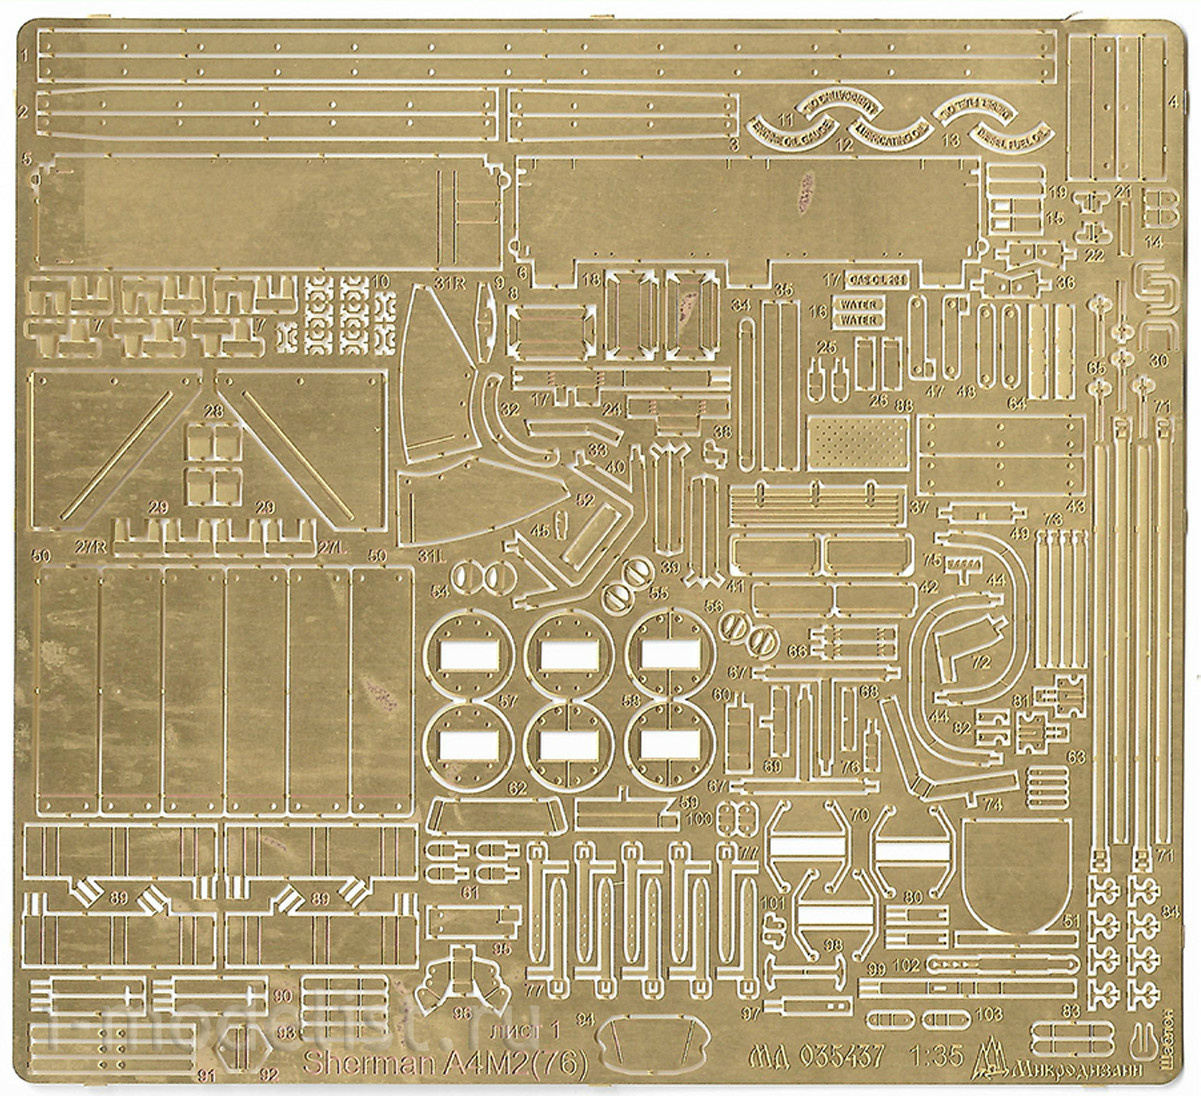 035437 Micro Design 1/35 Photo etching kit on M4A2(76) 